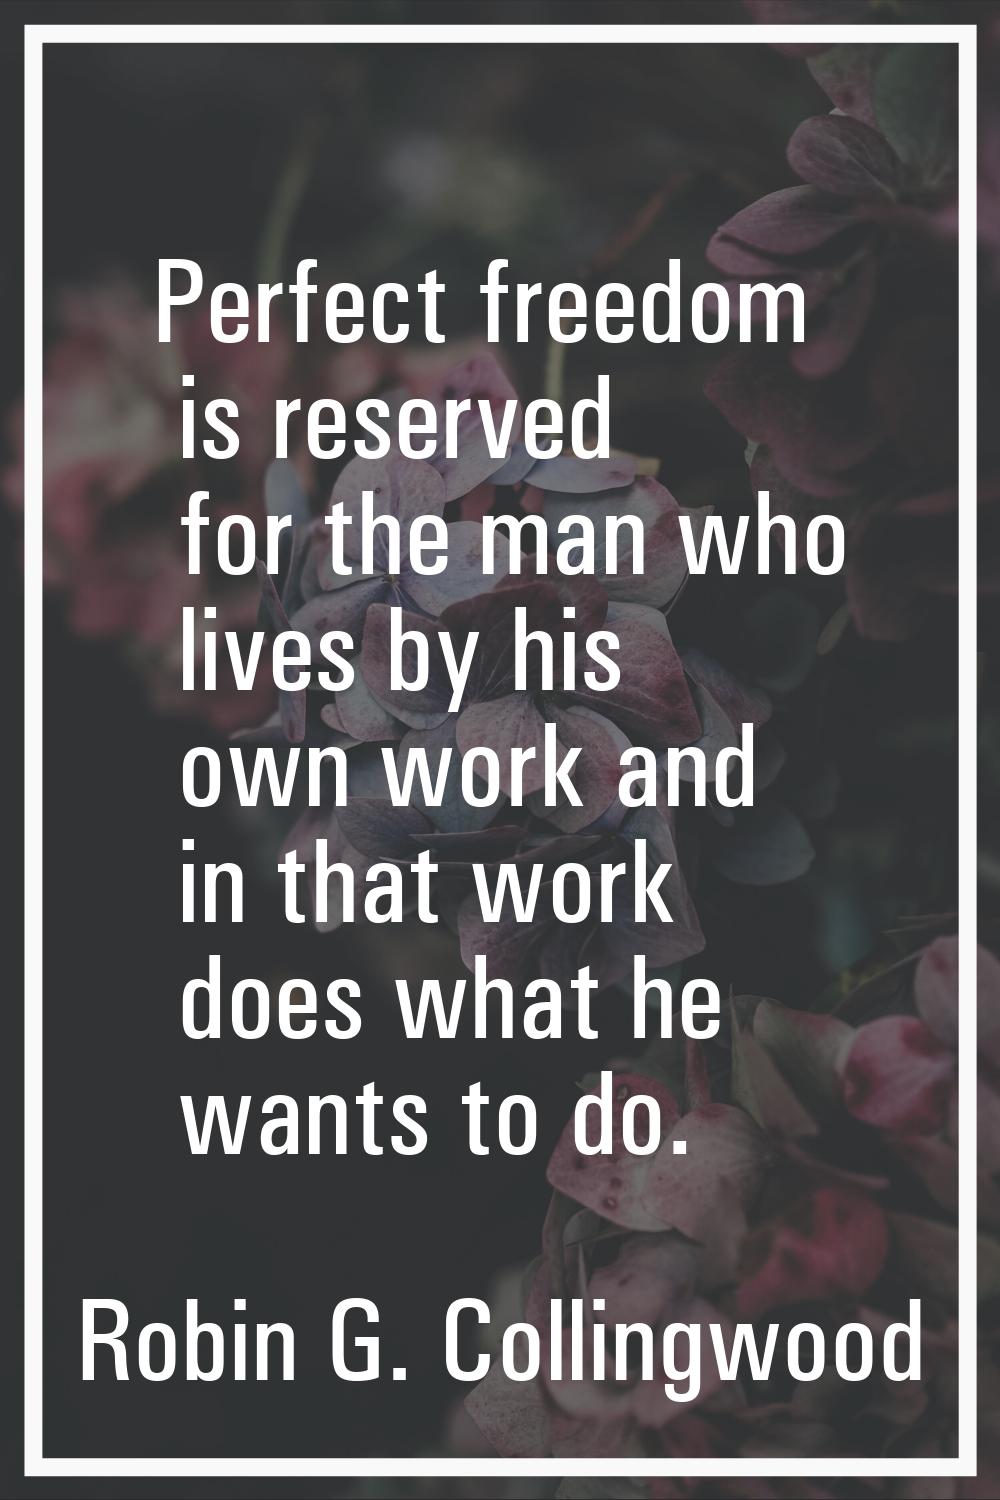 Perfect freedom is reserved for the man who lives by his own work and in that work does what he wan